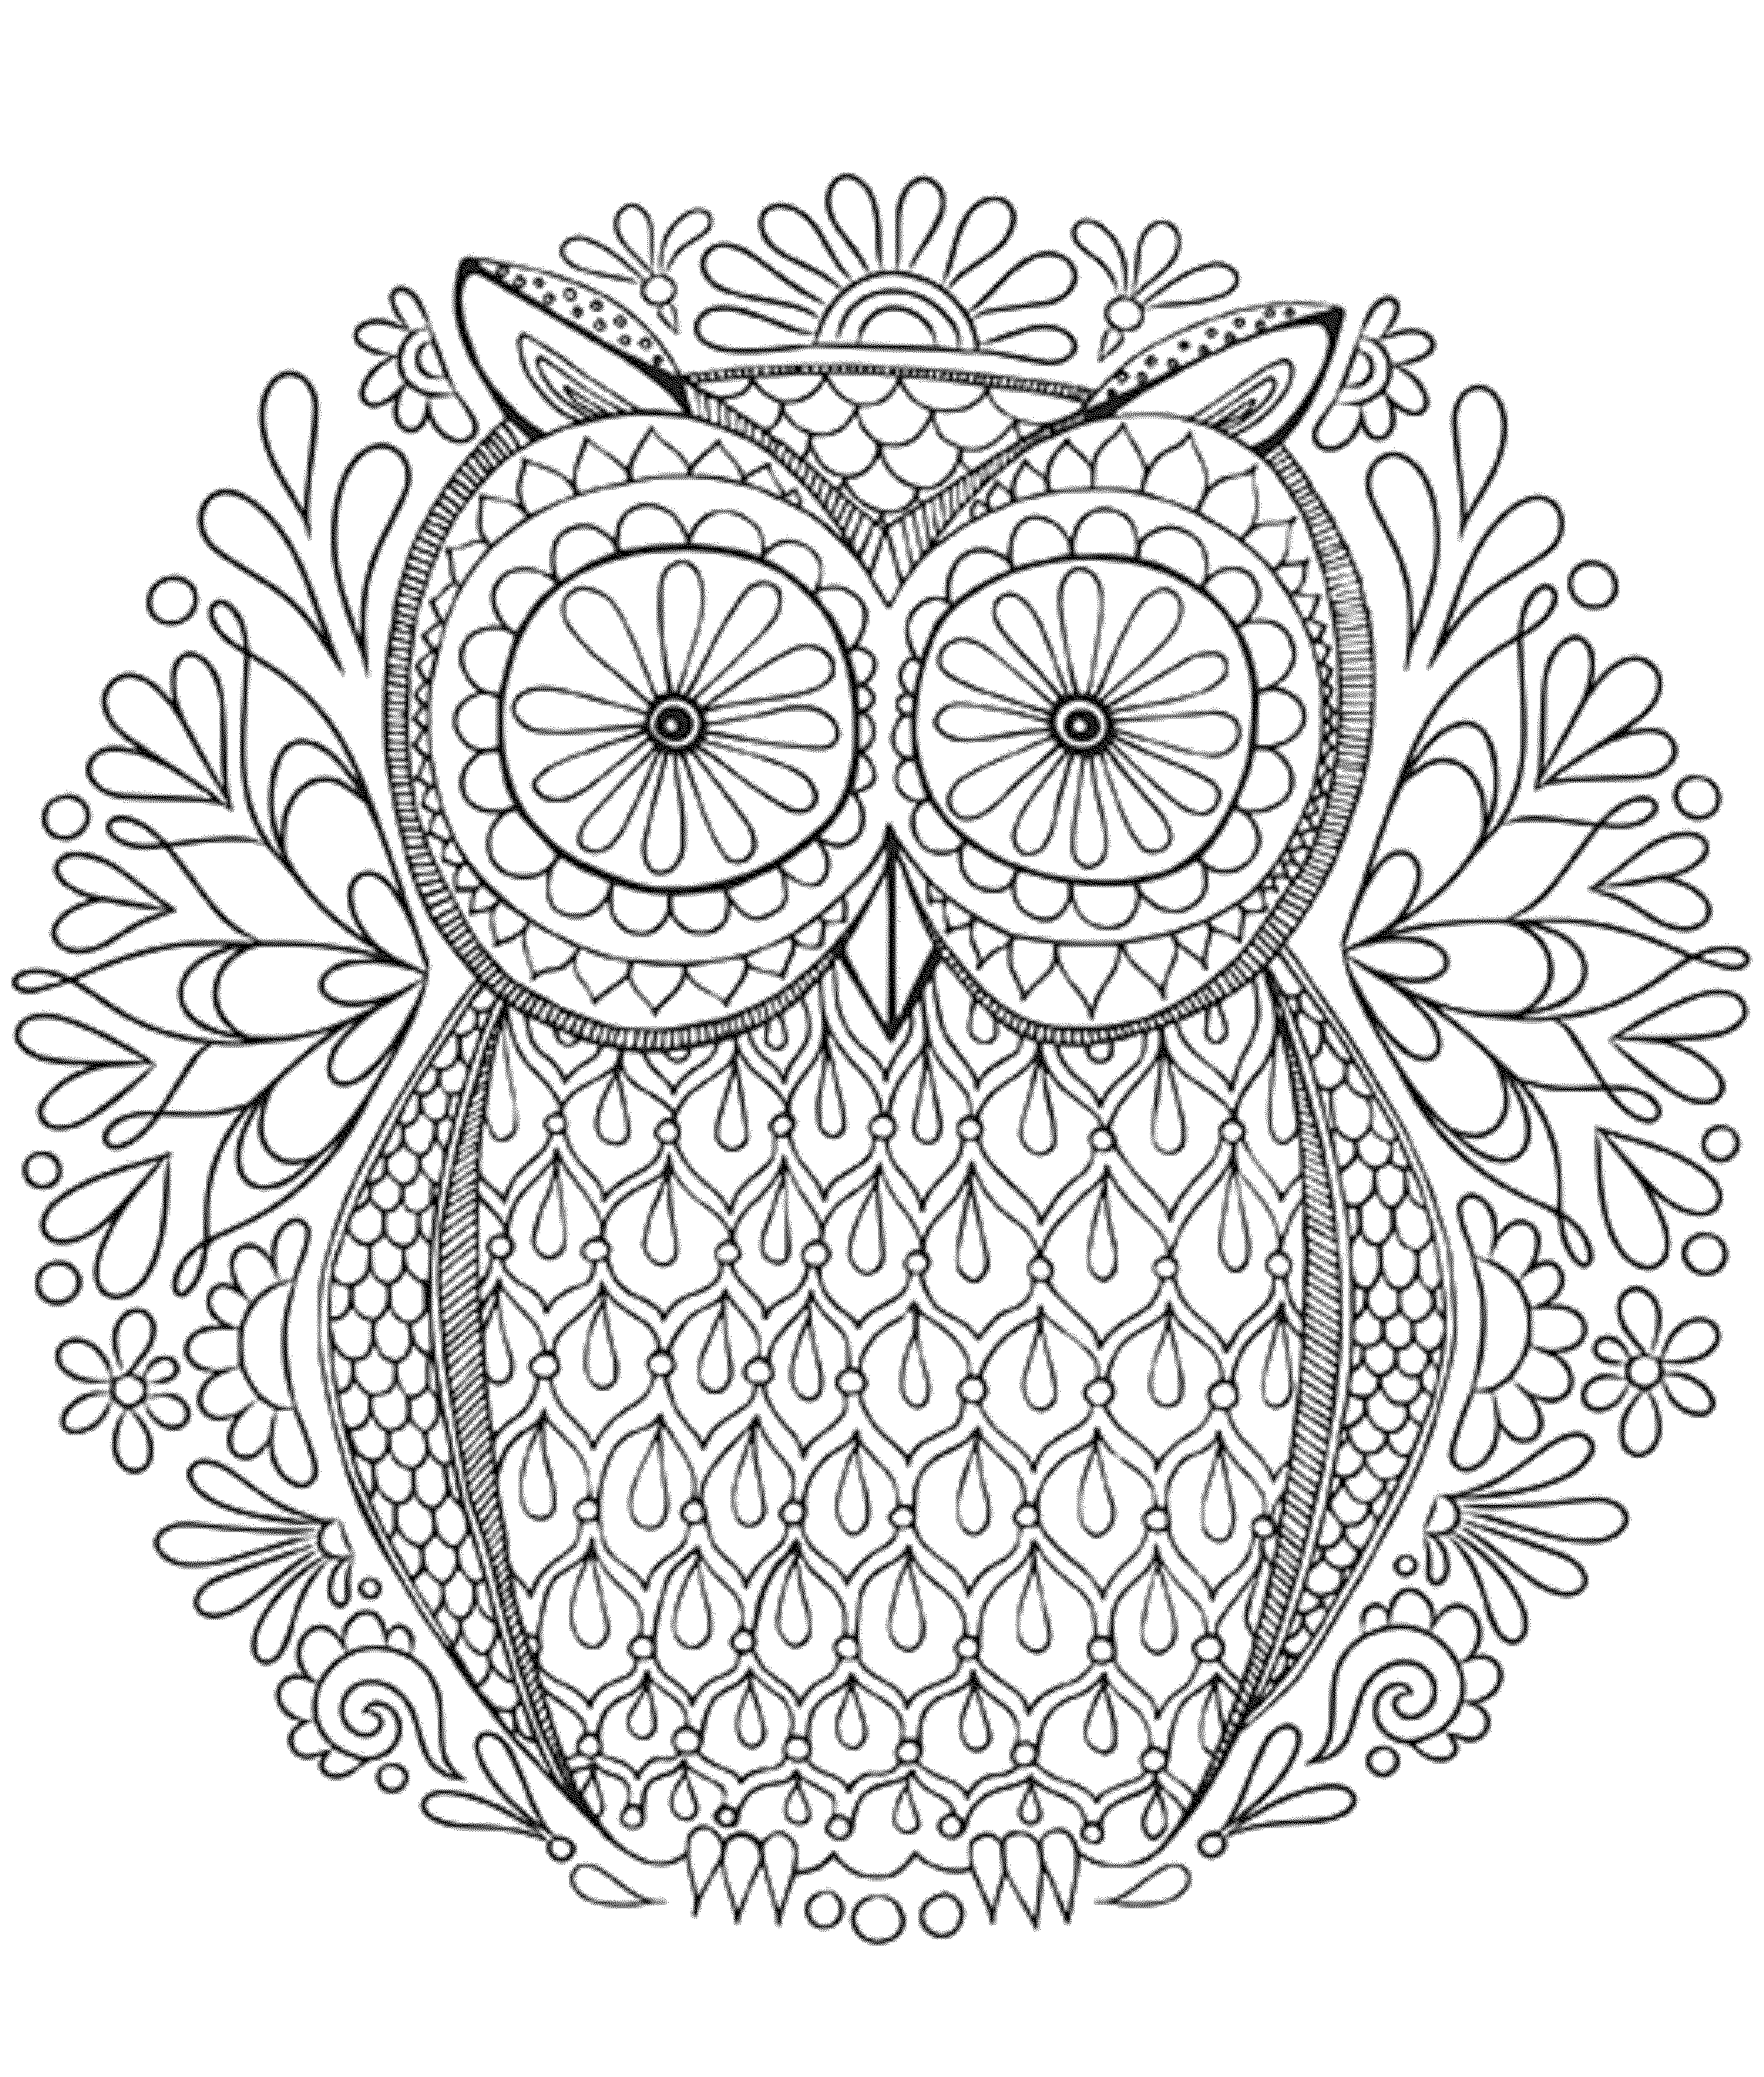 black and white coloring pages for adults creative haven magical mehndi designs coloring book black white for adults coloring pages and 